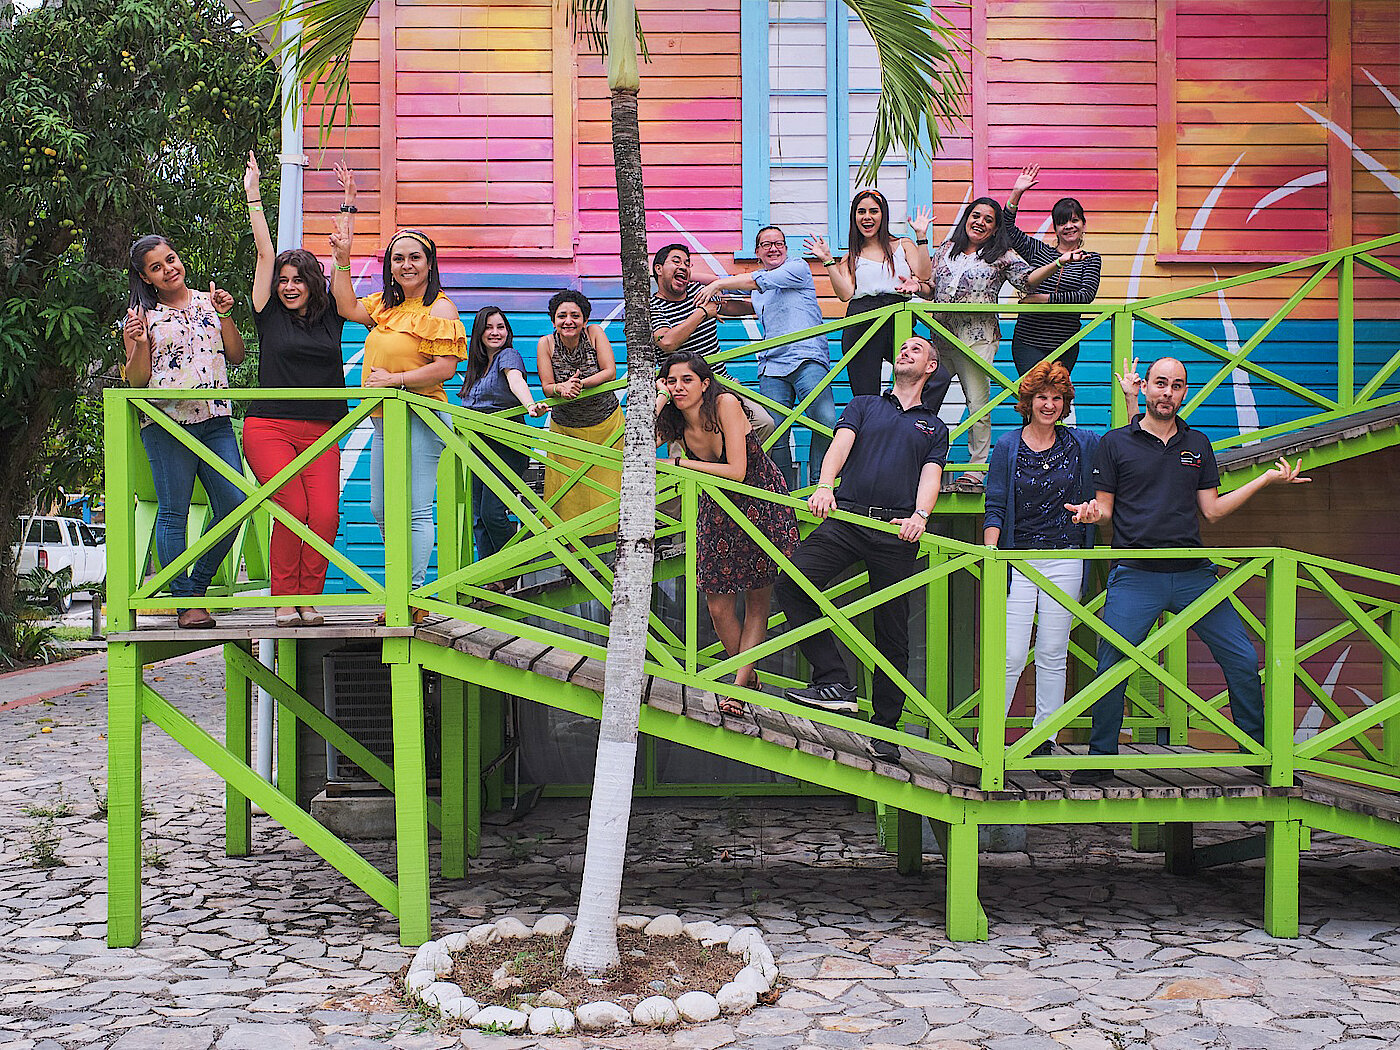 Photo: Several people standing on an access slope with green railings in front of a colourful building.